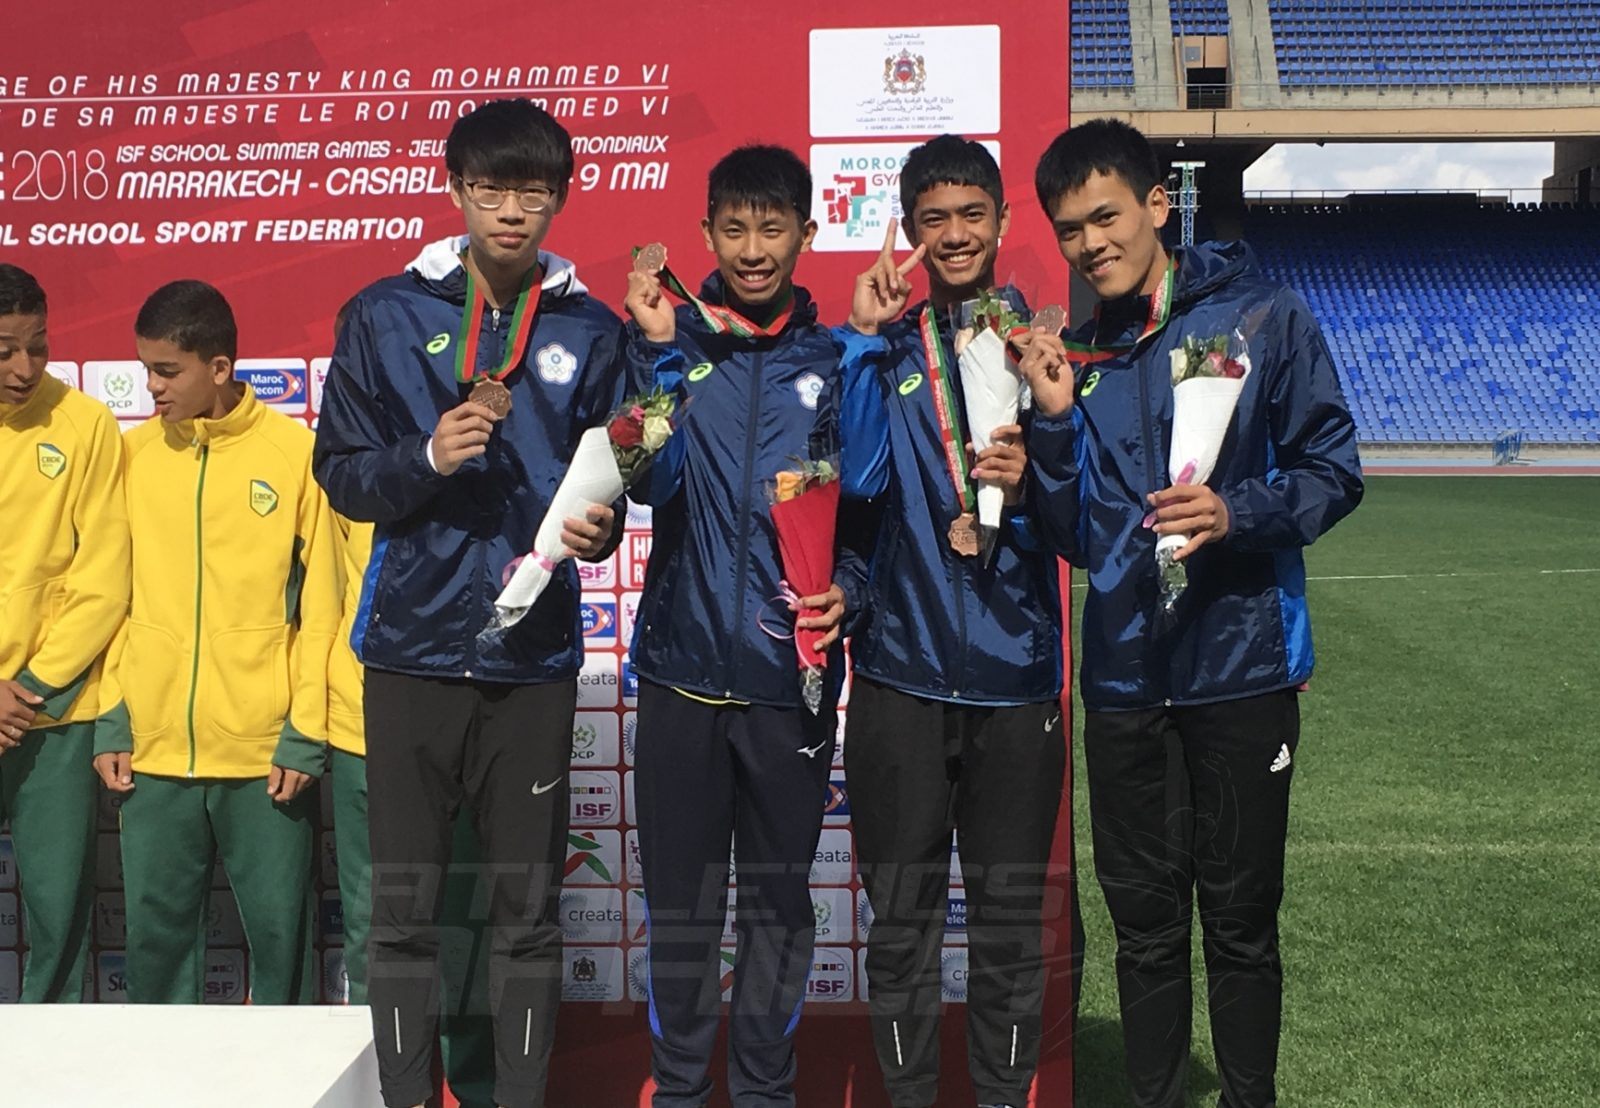 The Chinese Taipei quartet after the Boys 4x100m medal presentation at Gymnasiade 2018 in Marrakech / Photo Credit: Yomi Omogbeja